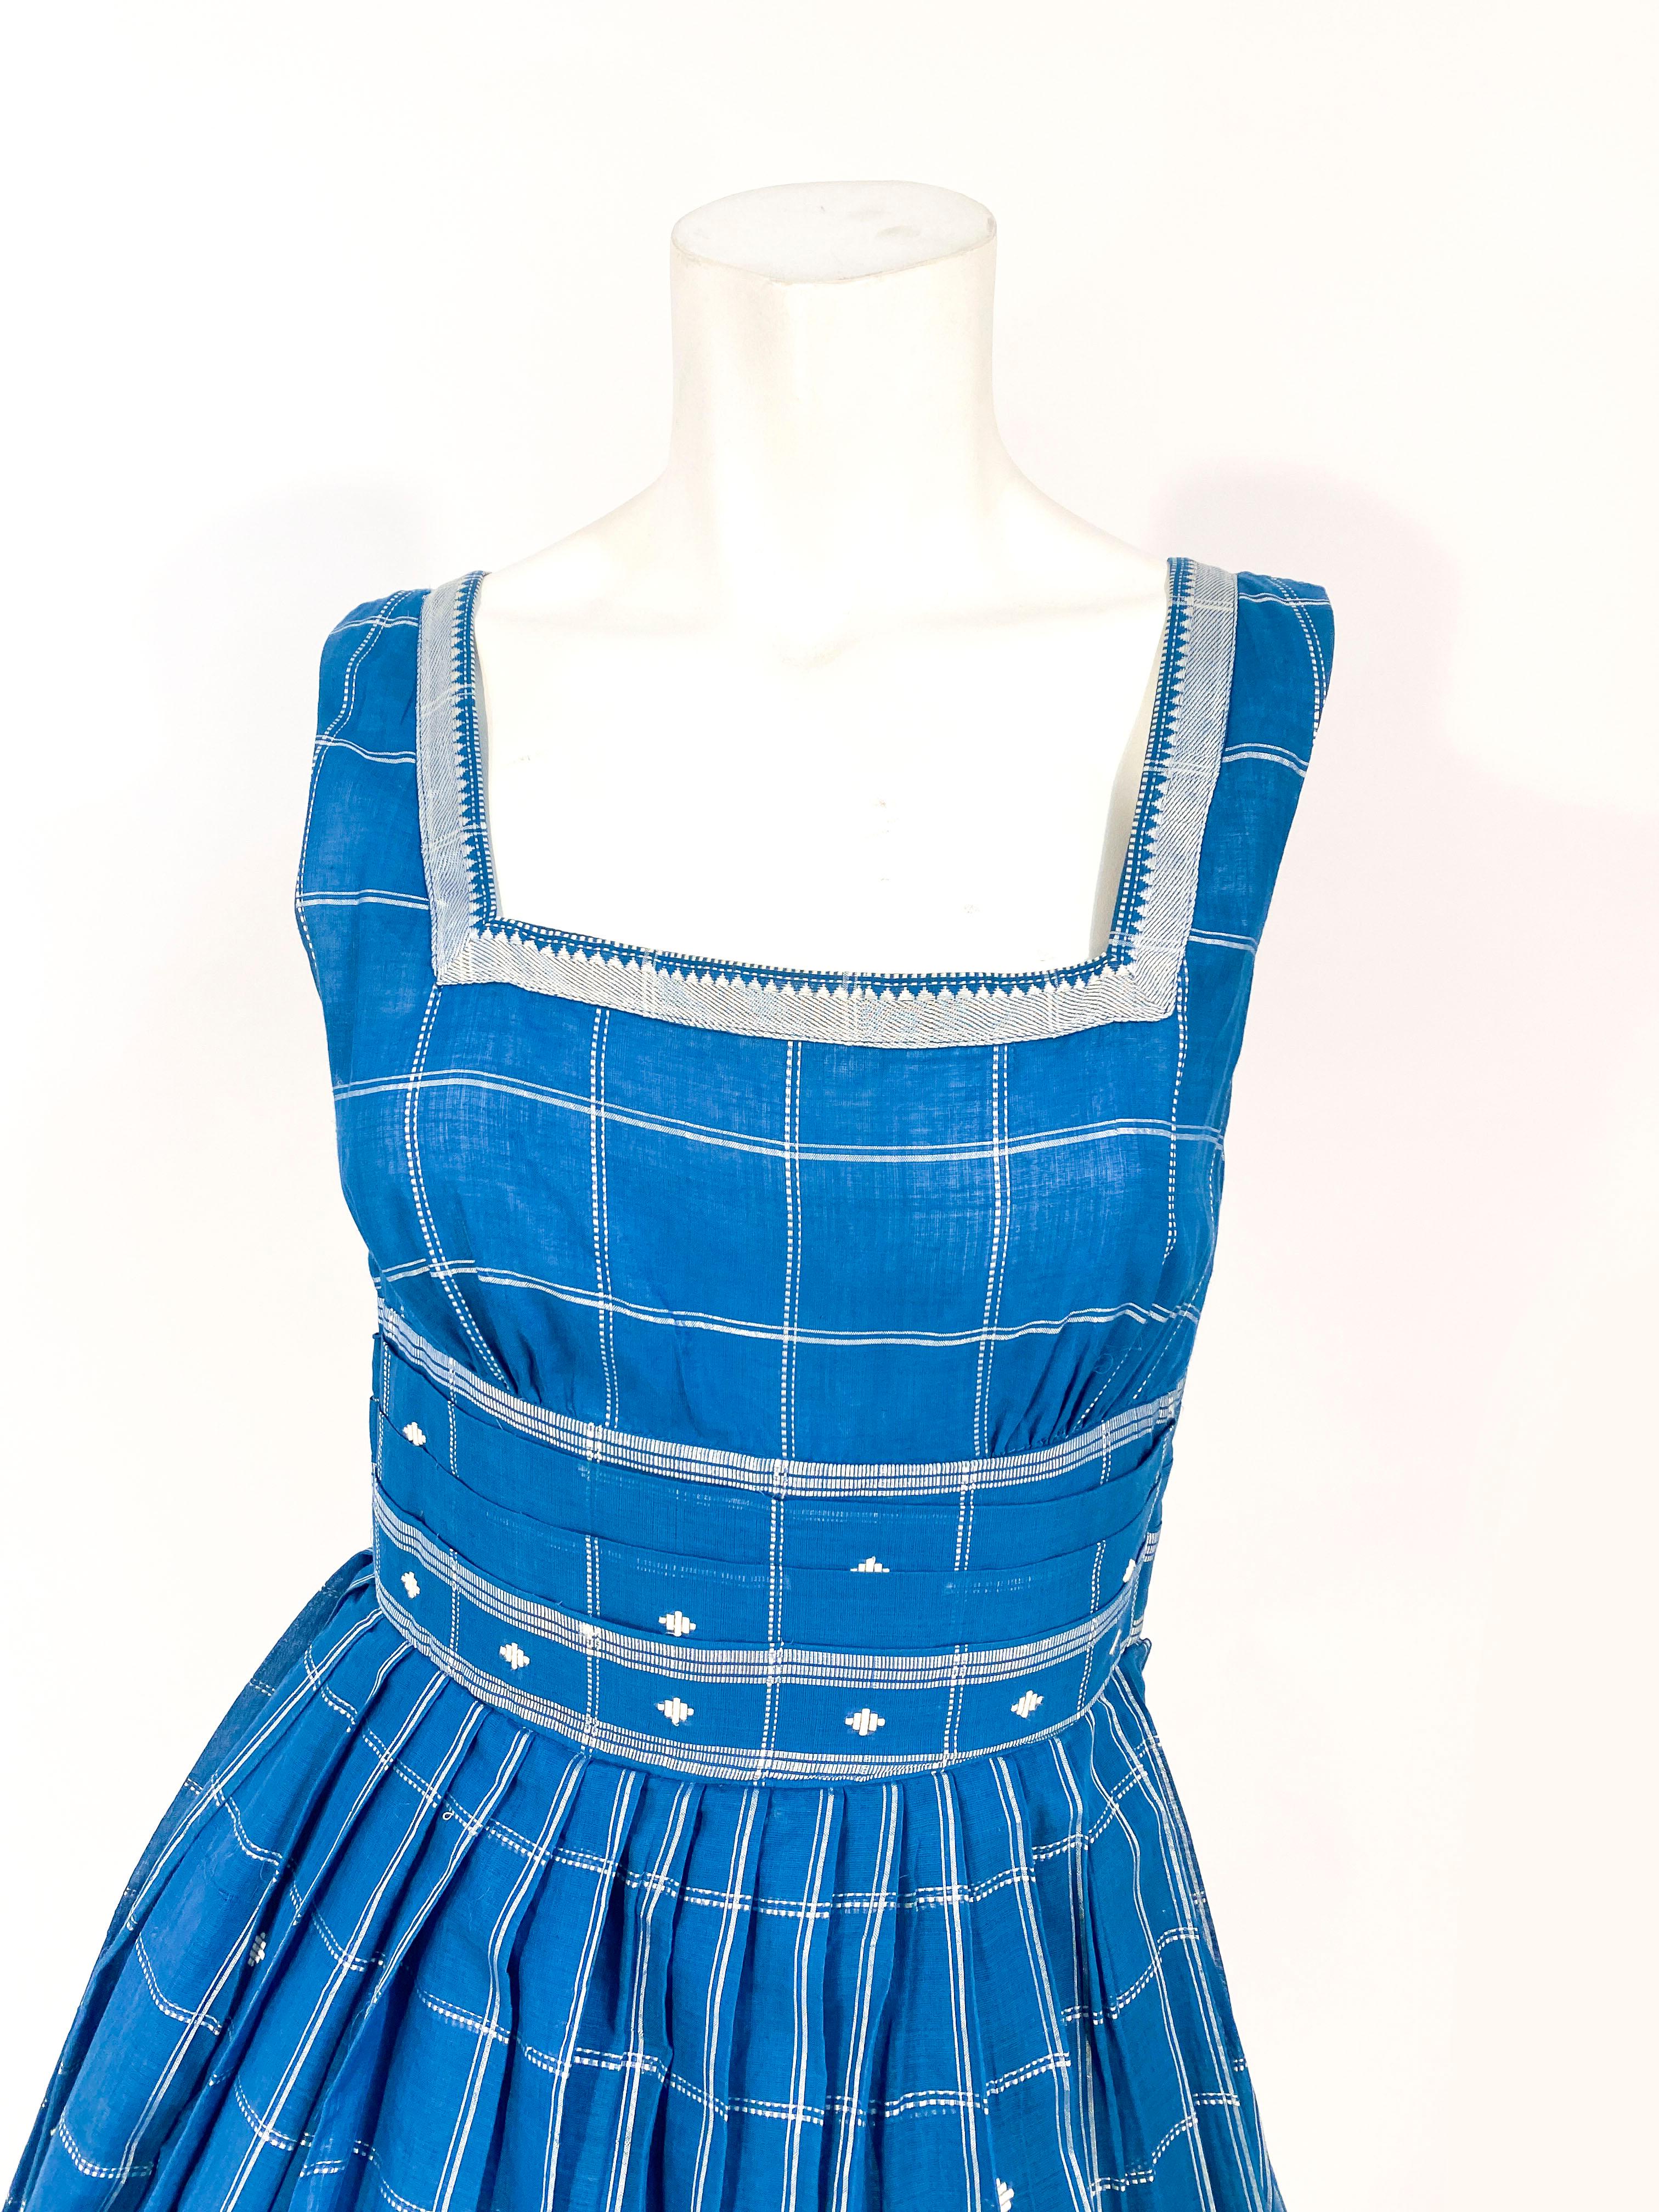 1950s custom-made cornflower blue day dress with a full pleated skirt, applied silver borders along the hem and square neckline, and a pleated waist. The textile has silver threading accents in plaid and small diamond shapes.